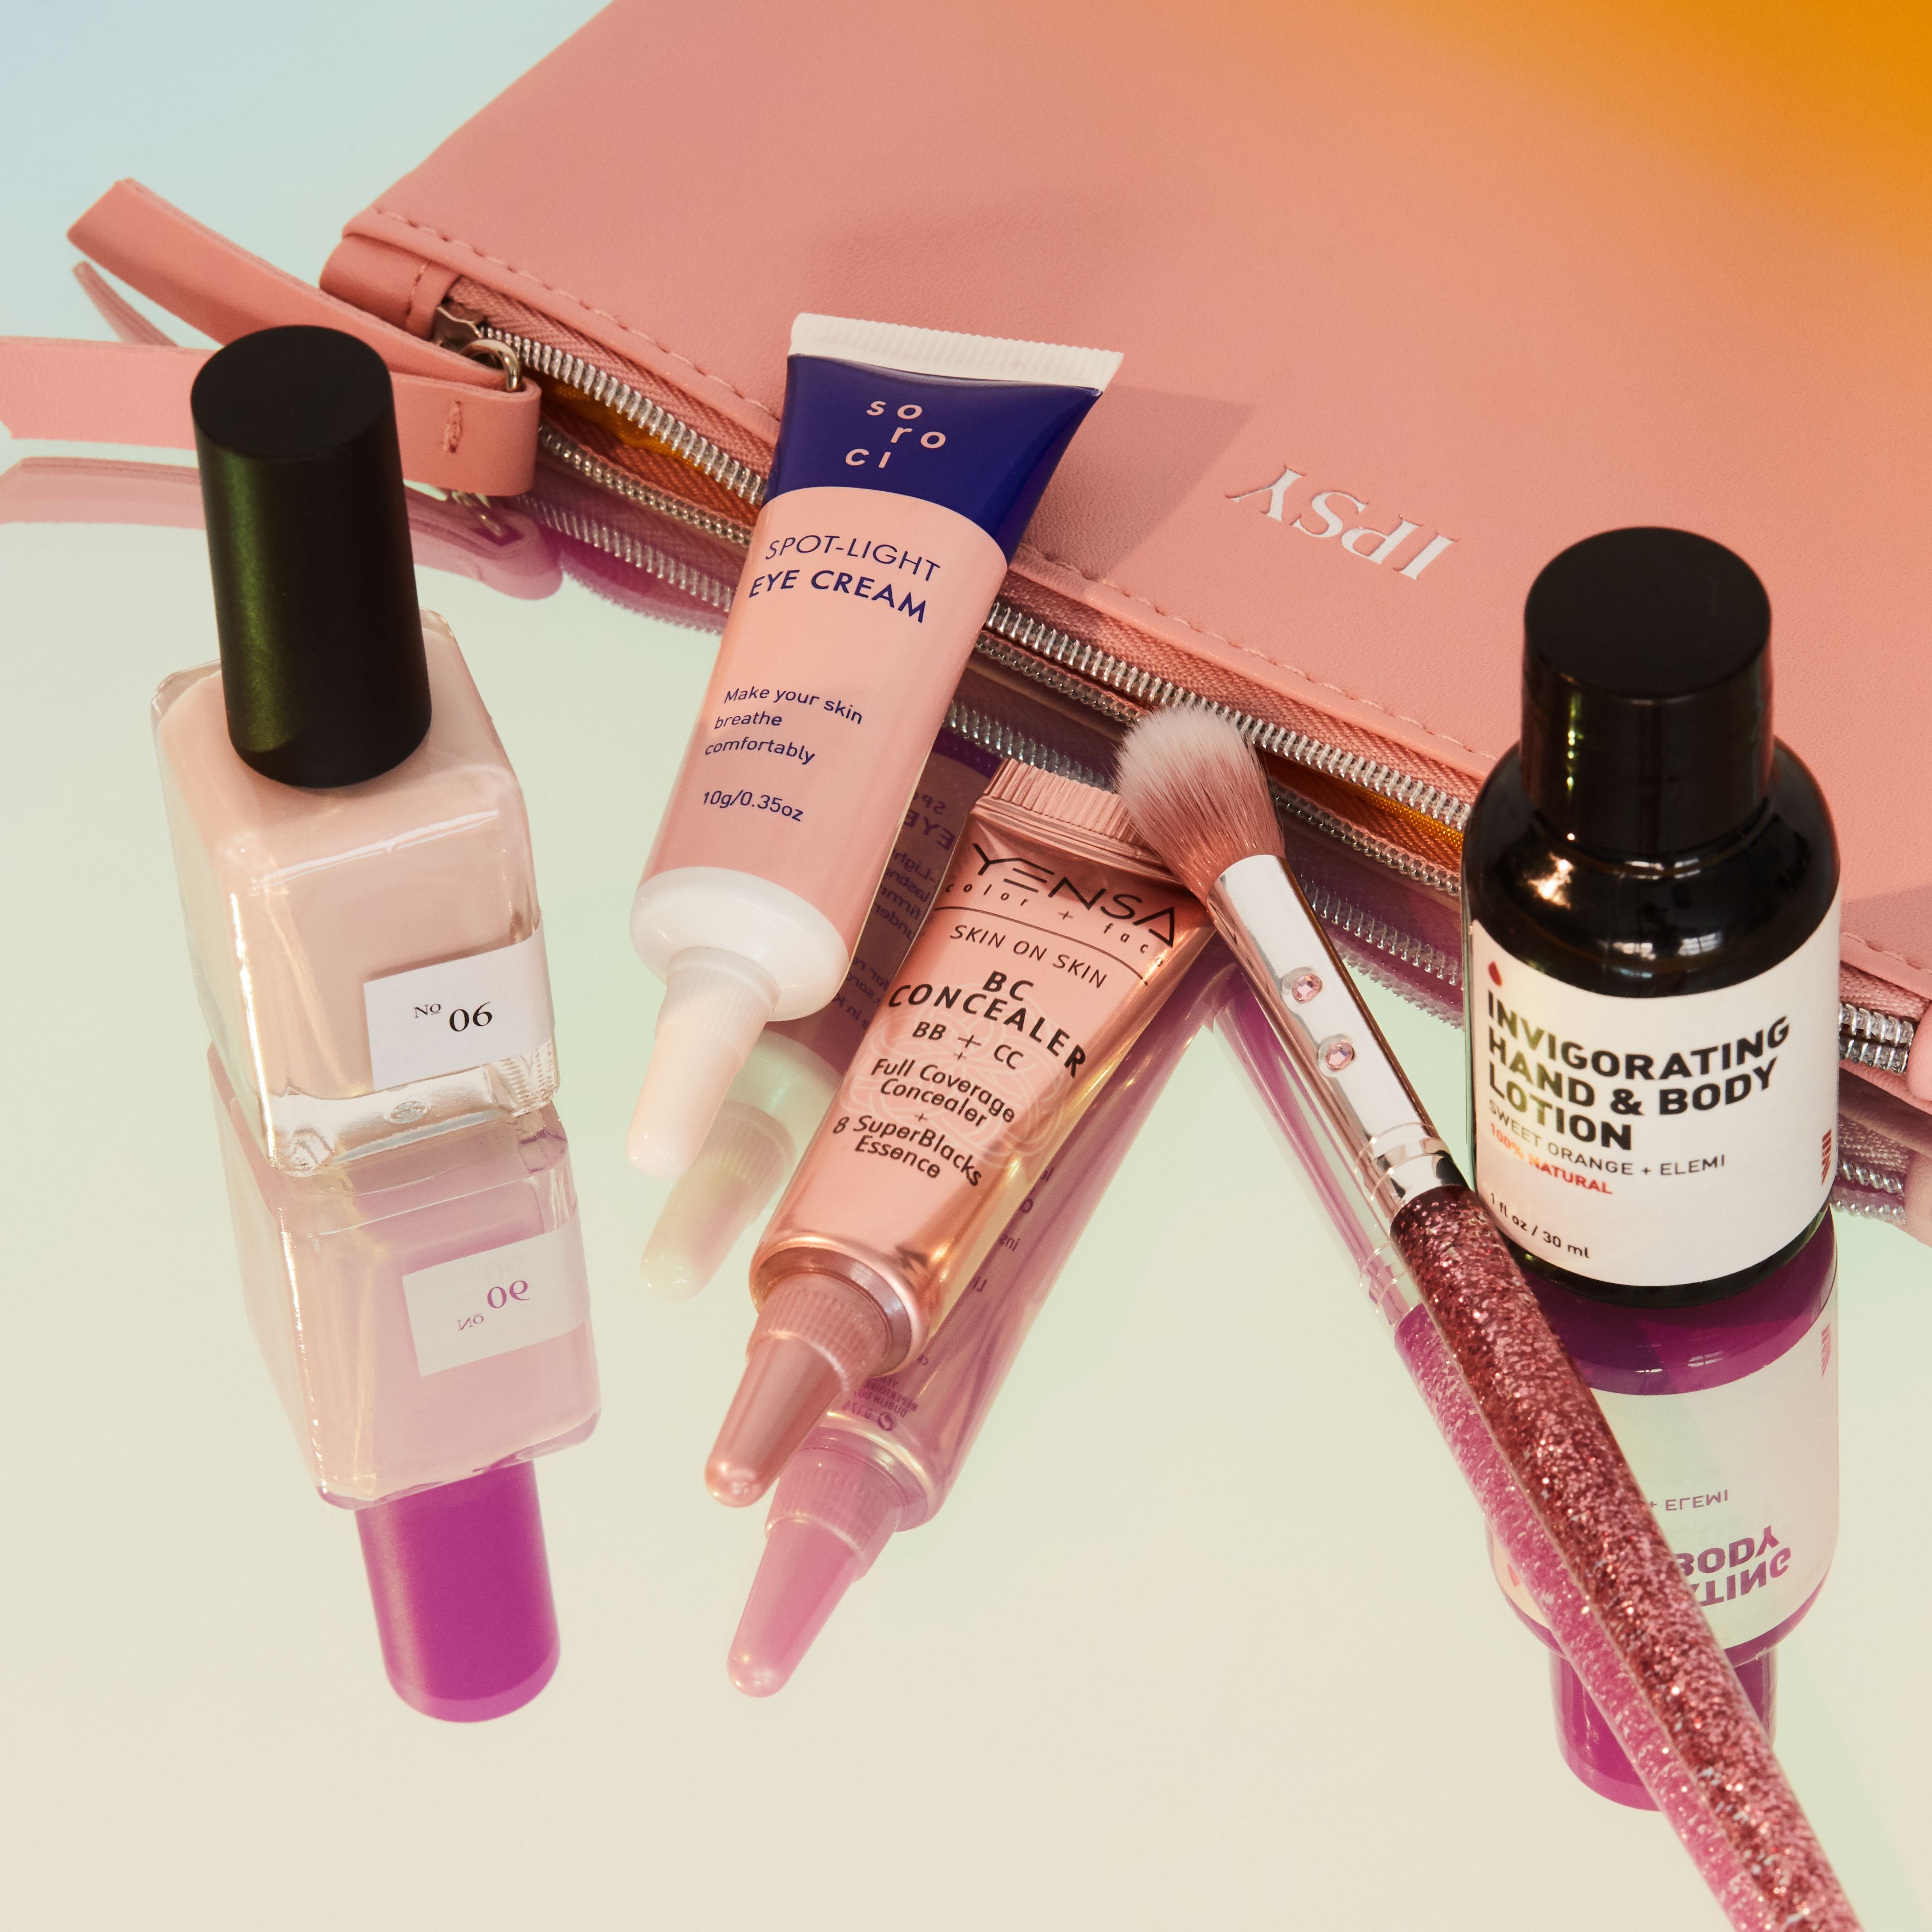 Glossy Pop Newsletter: Beauty brands are trying to reinvent glycerin